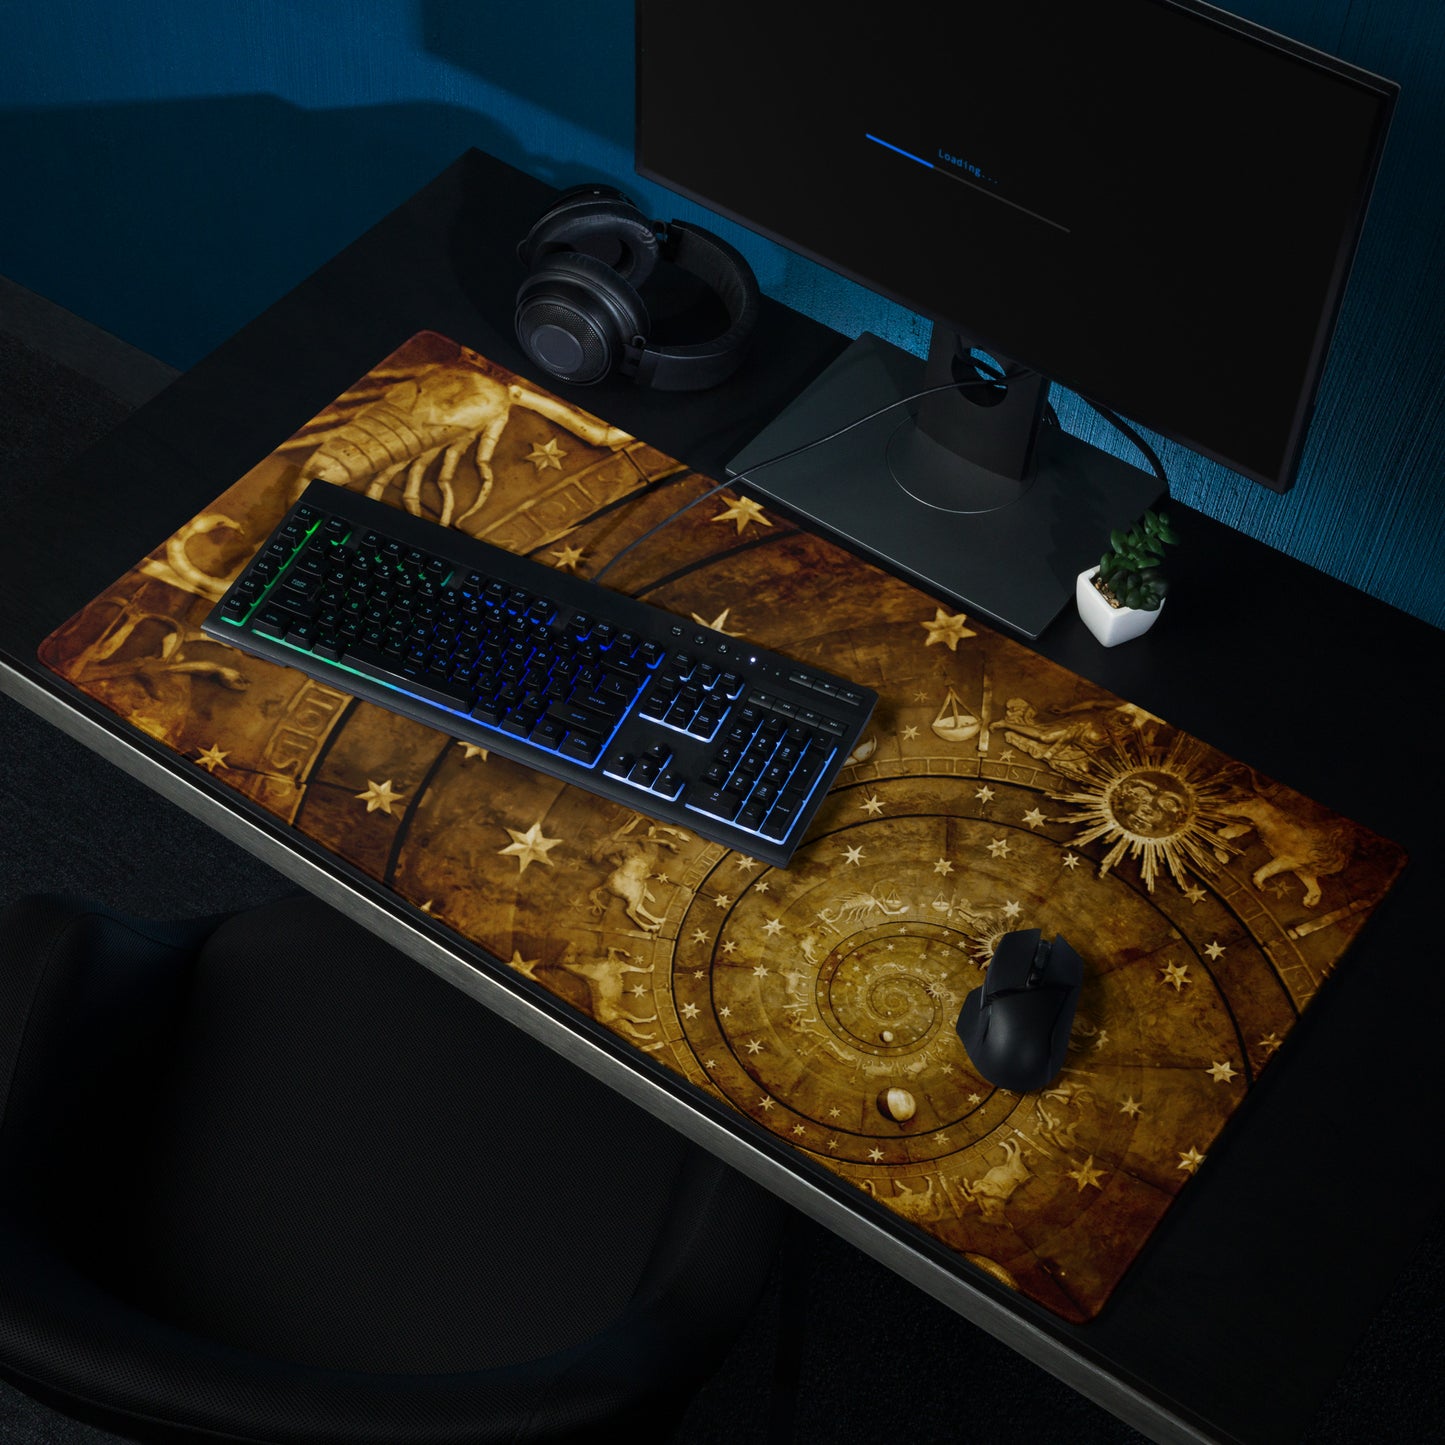 Golden Spiral Astrology Gaming Mouse Pad